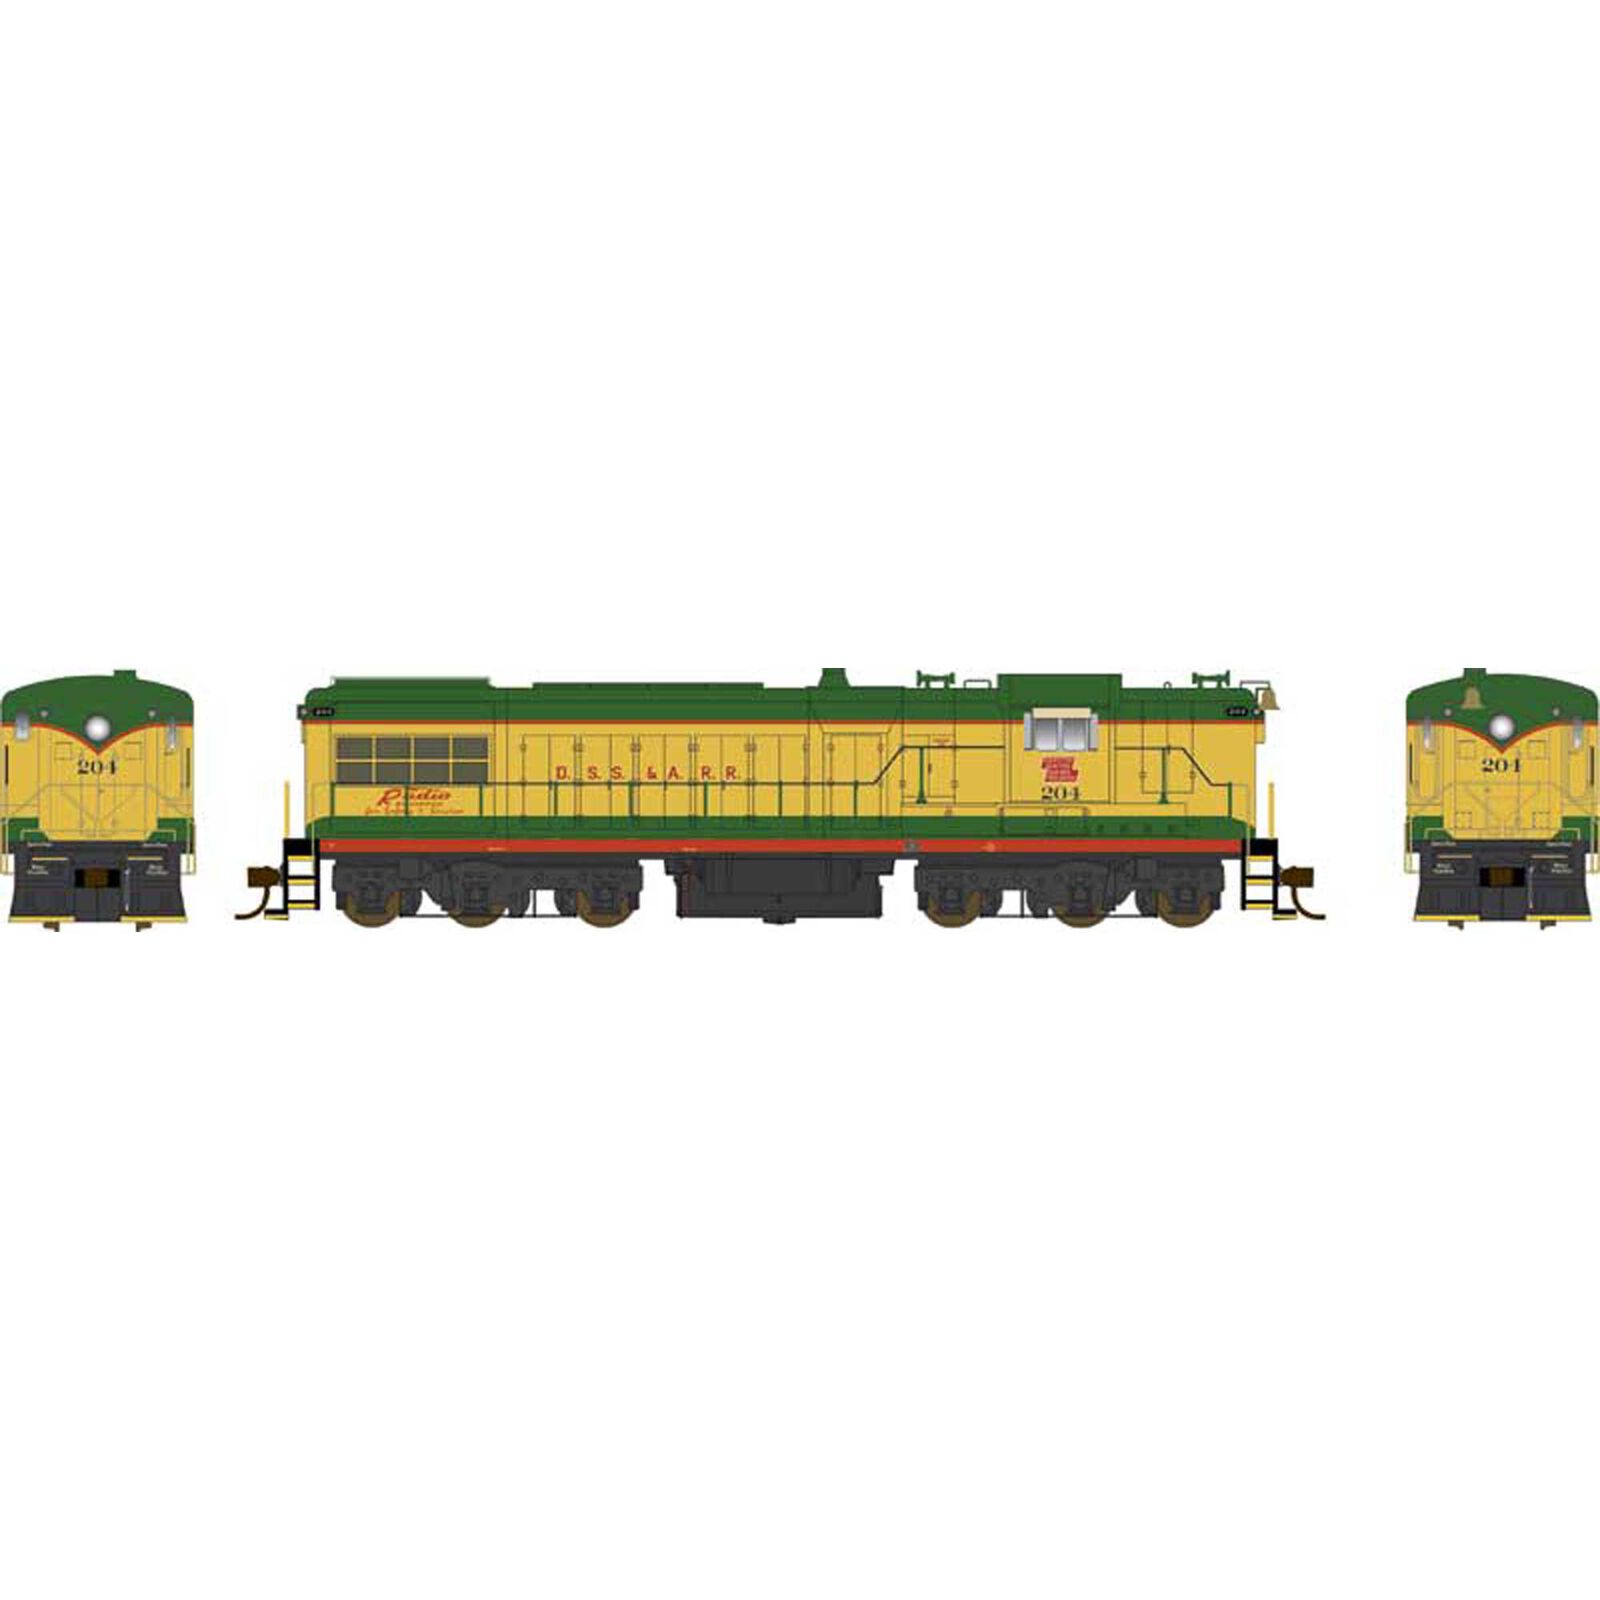 HO AS-616 DSSA Loco #204 with sound